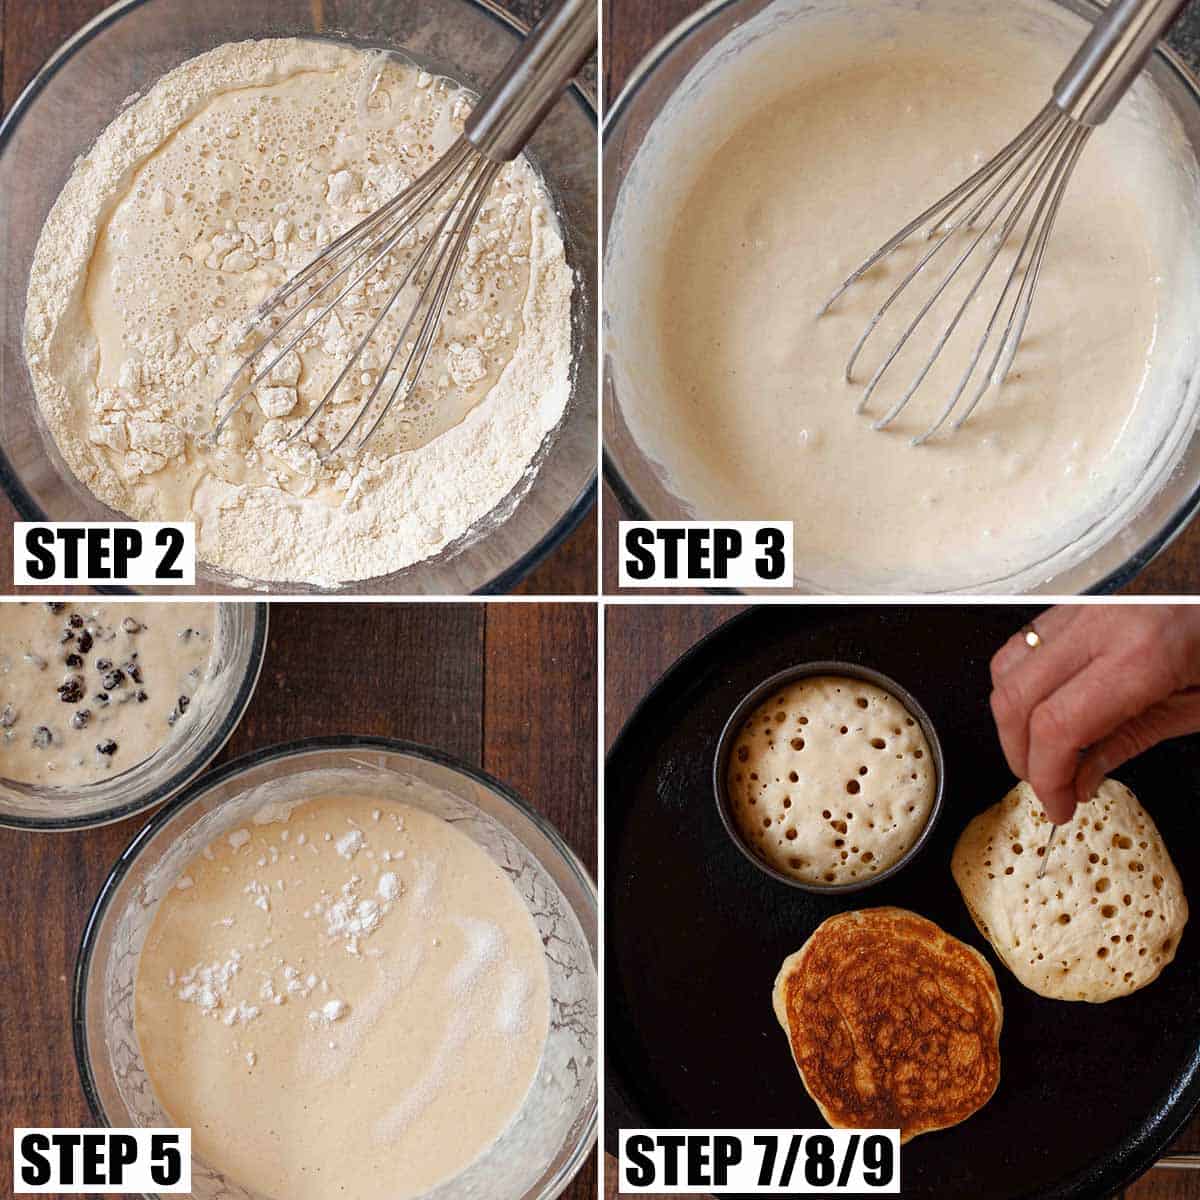 Collage of images showing griddle bread batter being made and cooked.